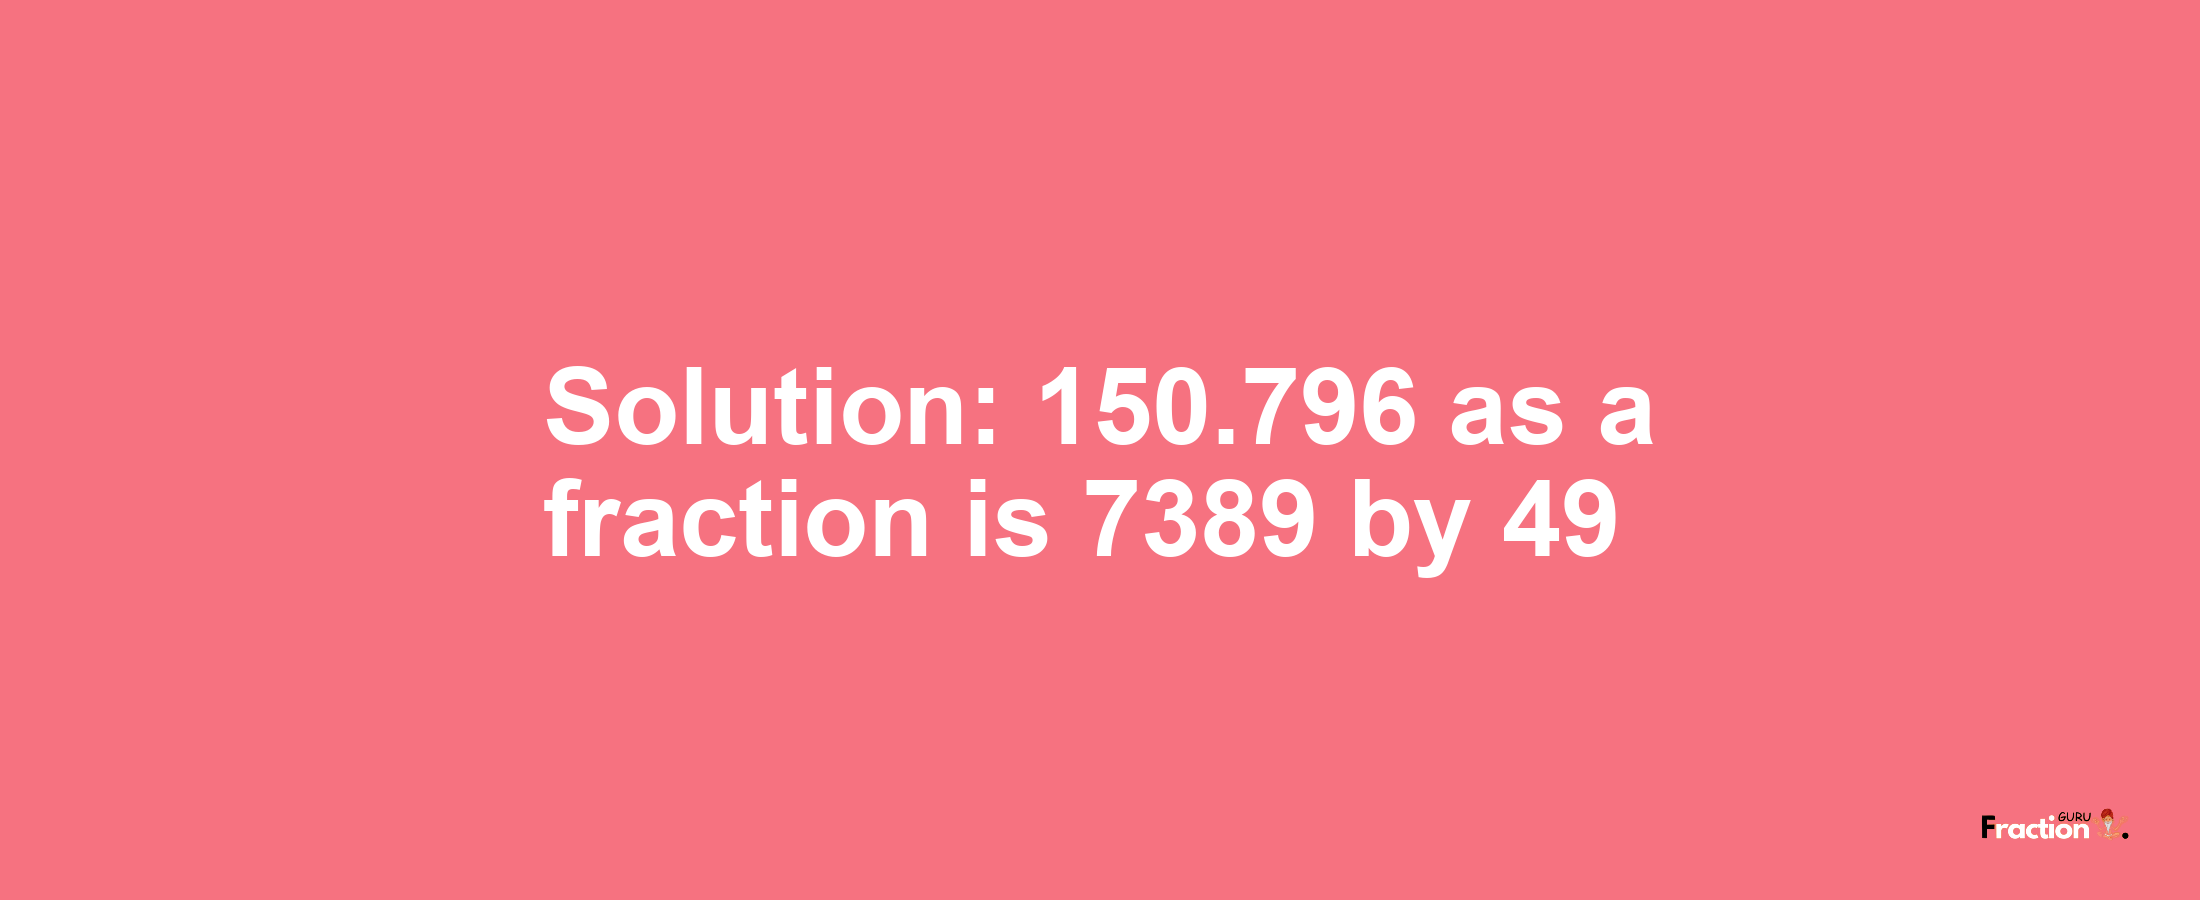 Solution:150.796 as a fraction is 7389/49